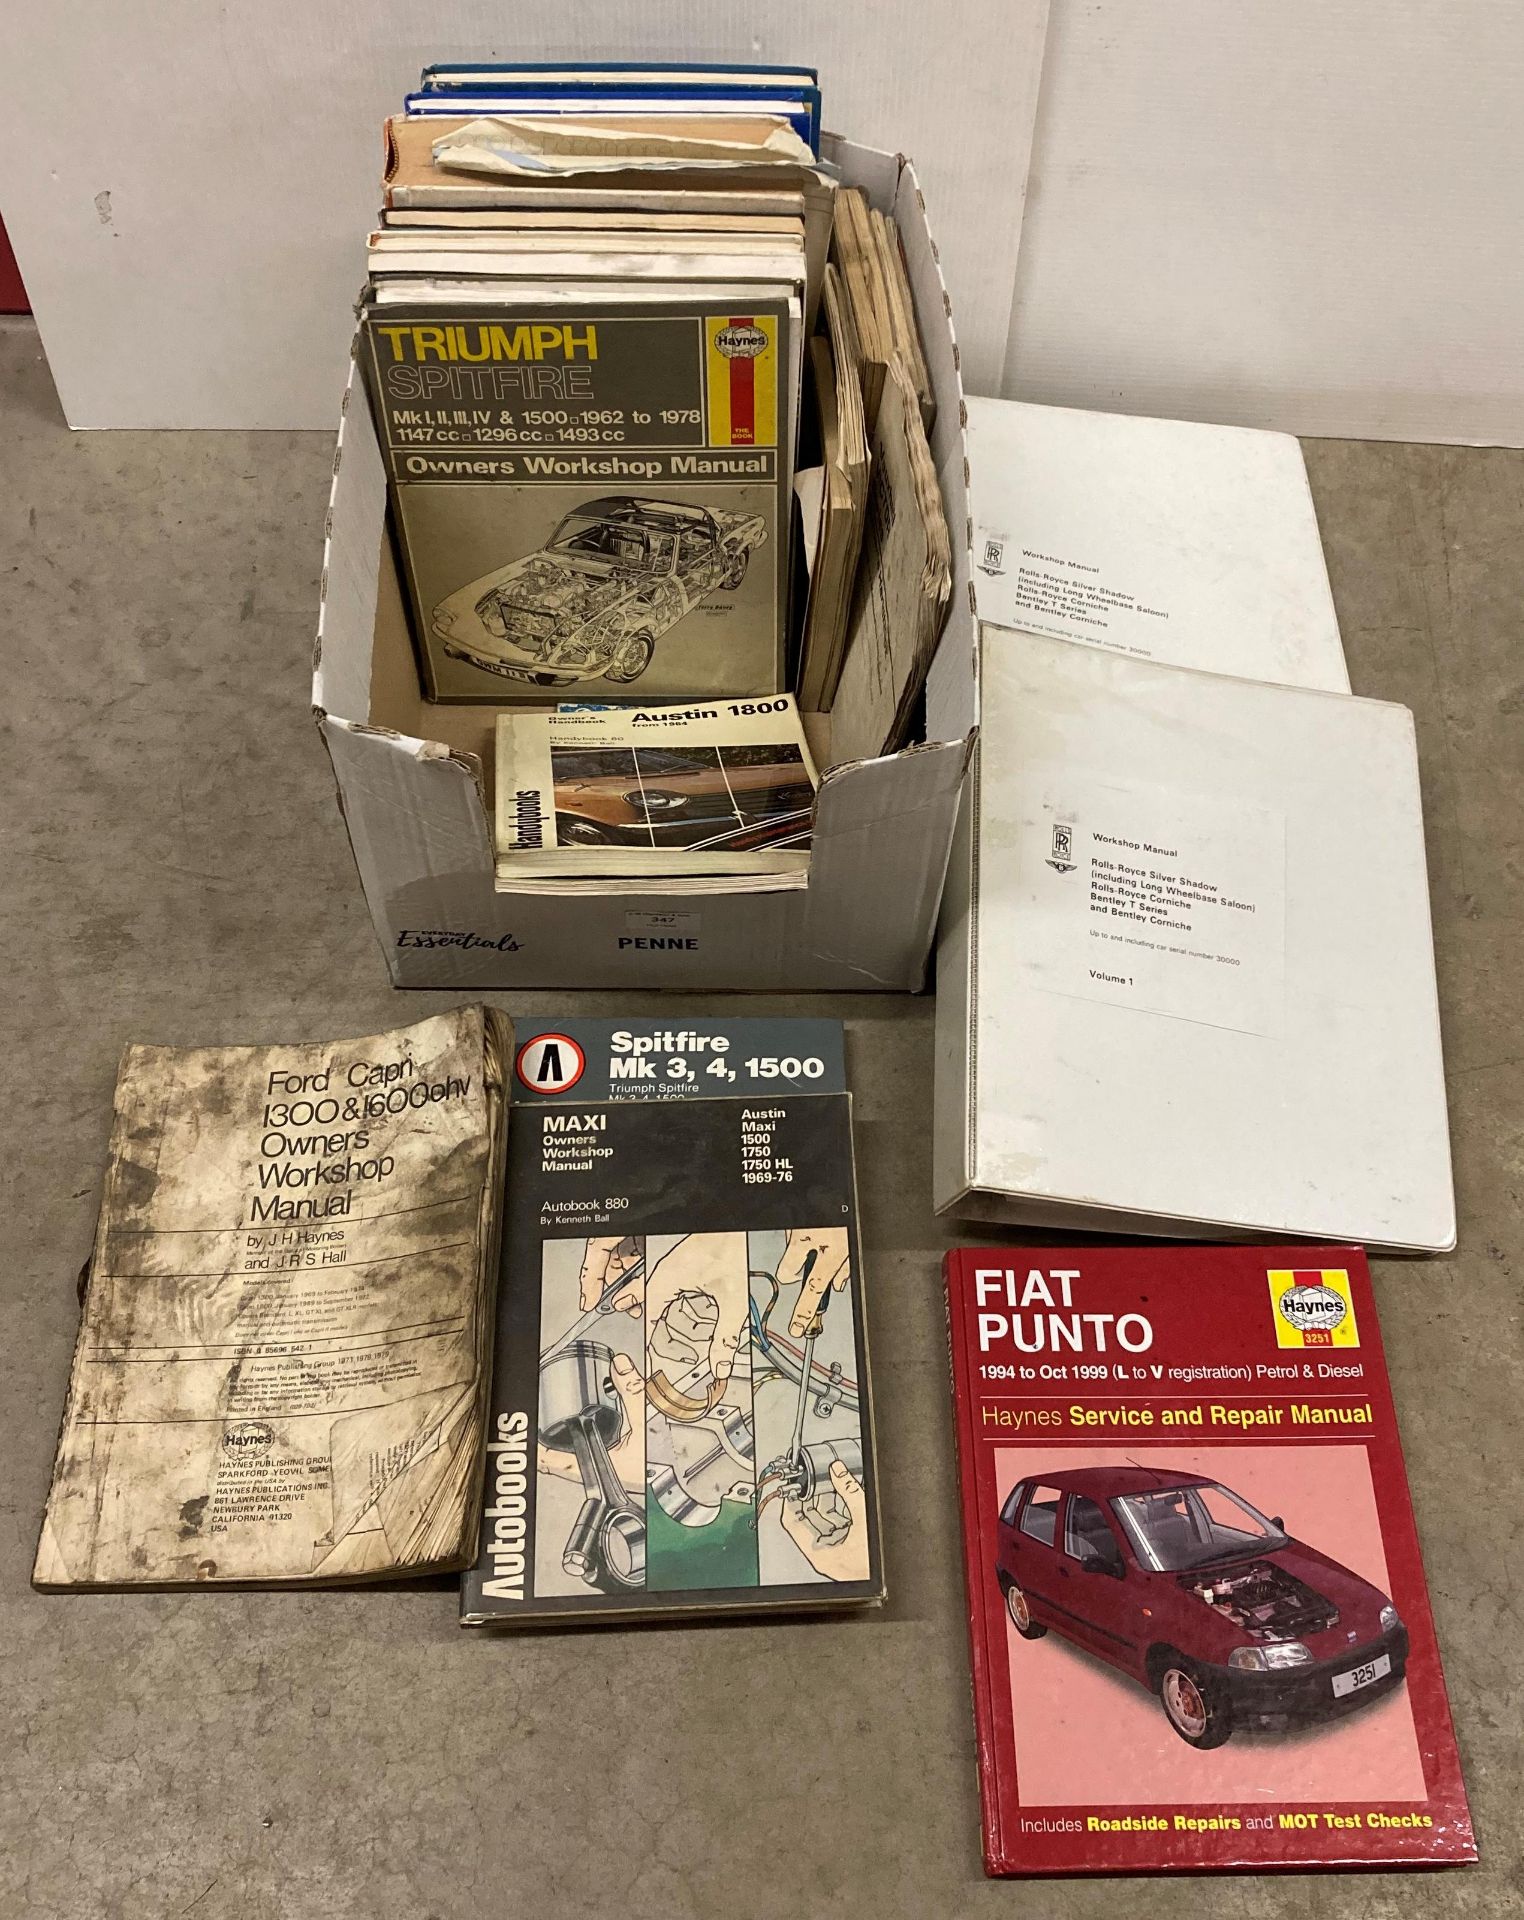 Contents to box - assorted car manuals and folders including Volume 1 & 2 Workshop Manual for Rolls